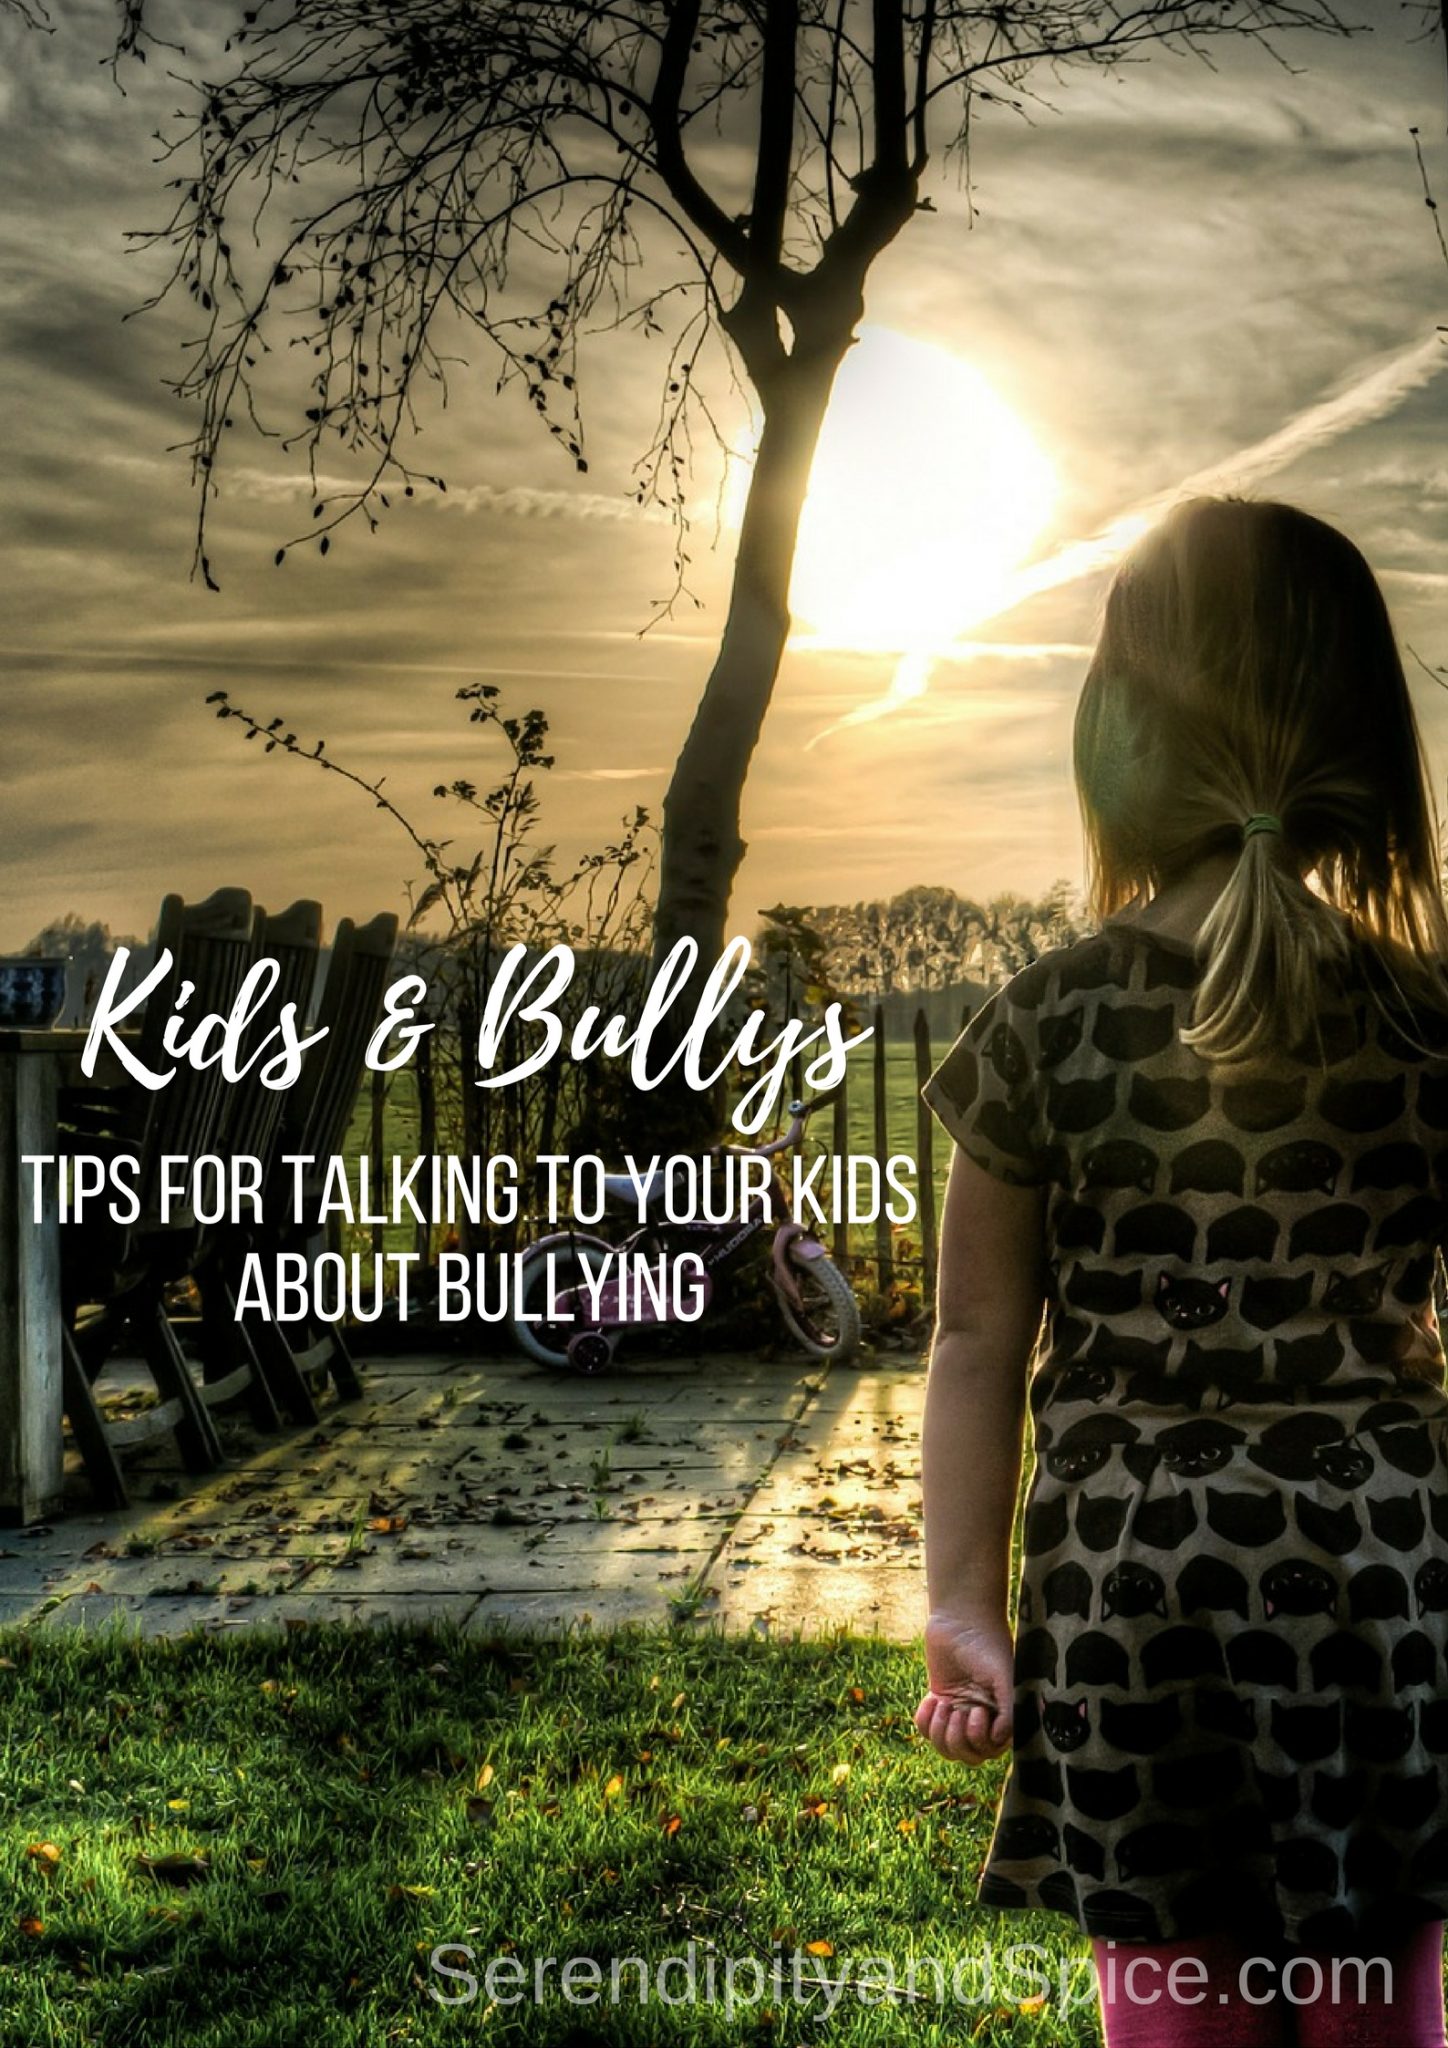 Tips for Talking to Kids about Bullying